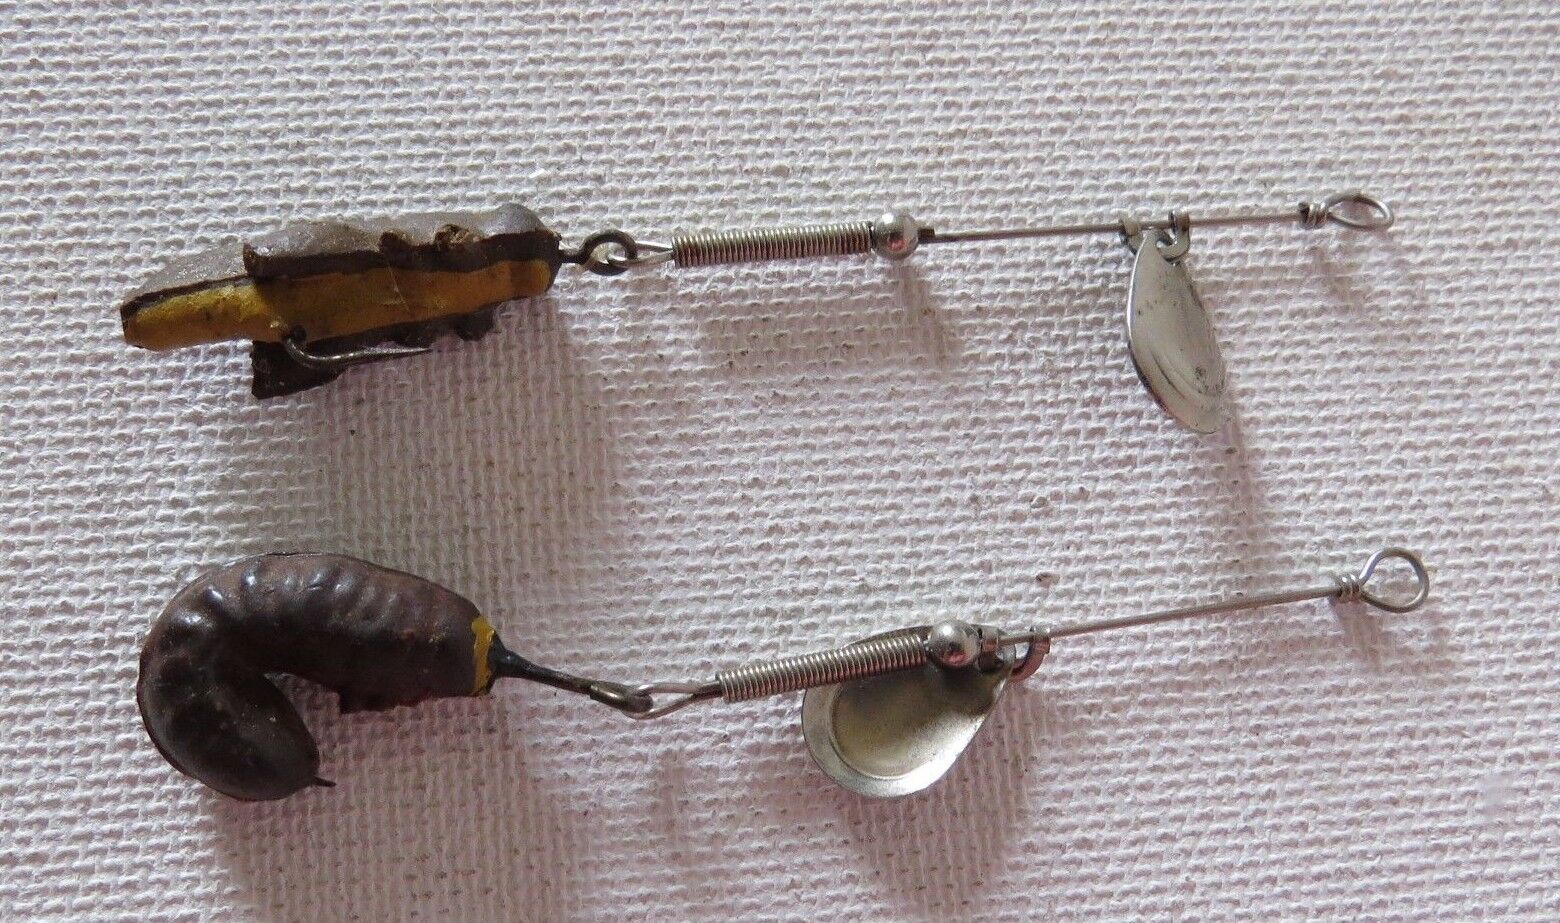 2 HAND MADE Fishing Lure~Spinners~ metal~Worm Bug NOVELTY~CAN THEY CATCH  FISH?